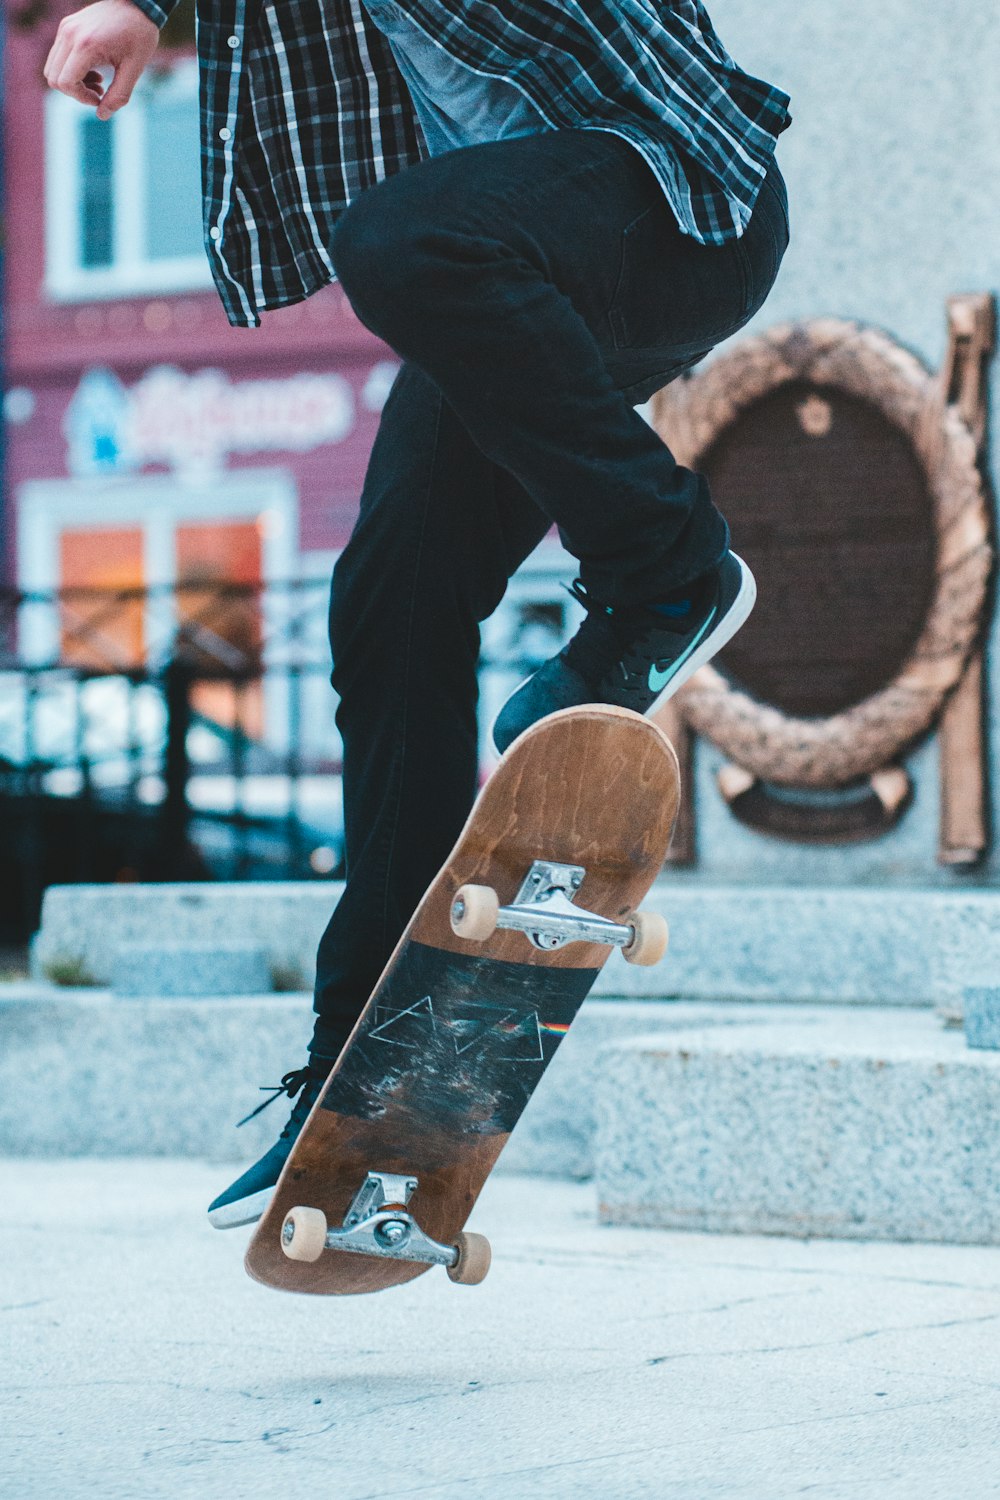 person in black pants and brown and white sneakers standing on brown skateboard during daytime